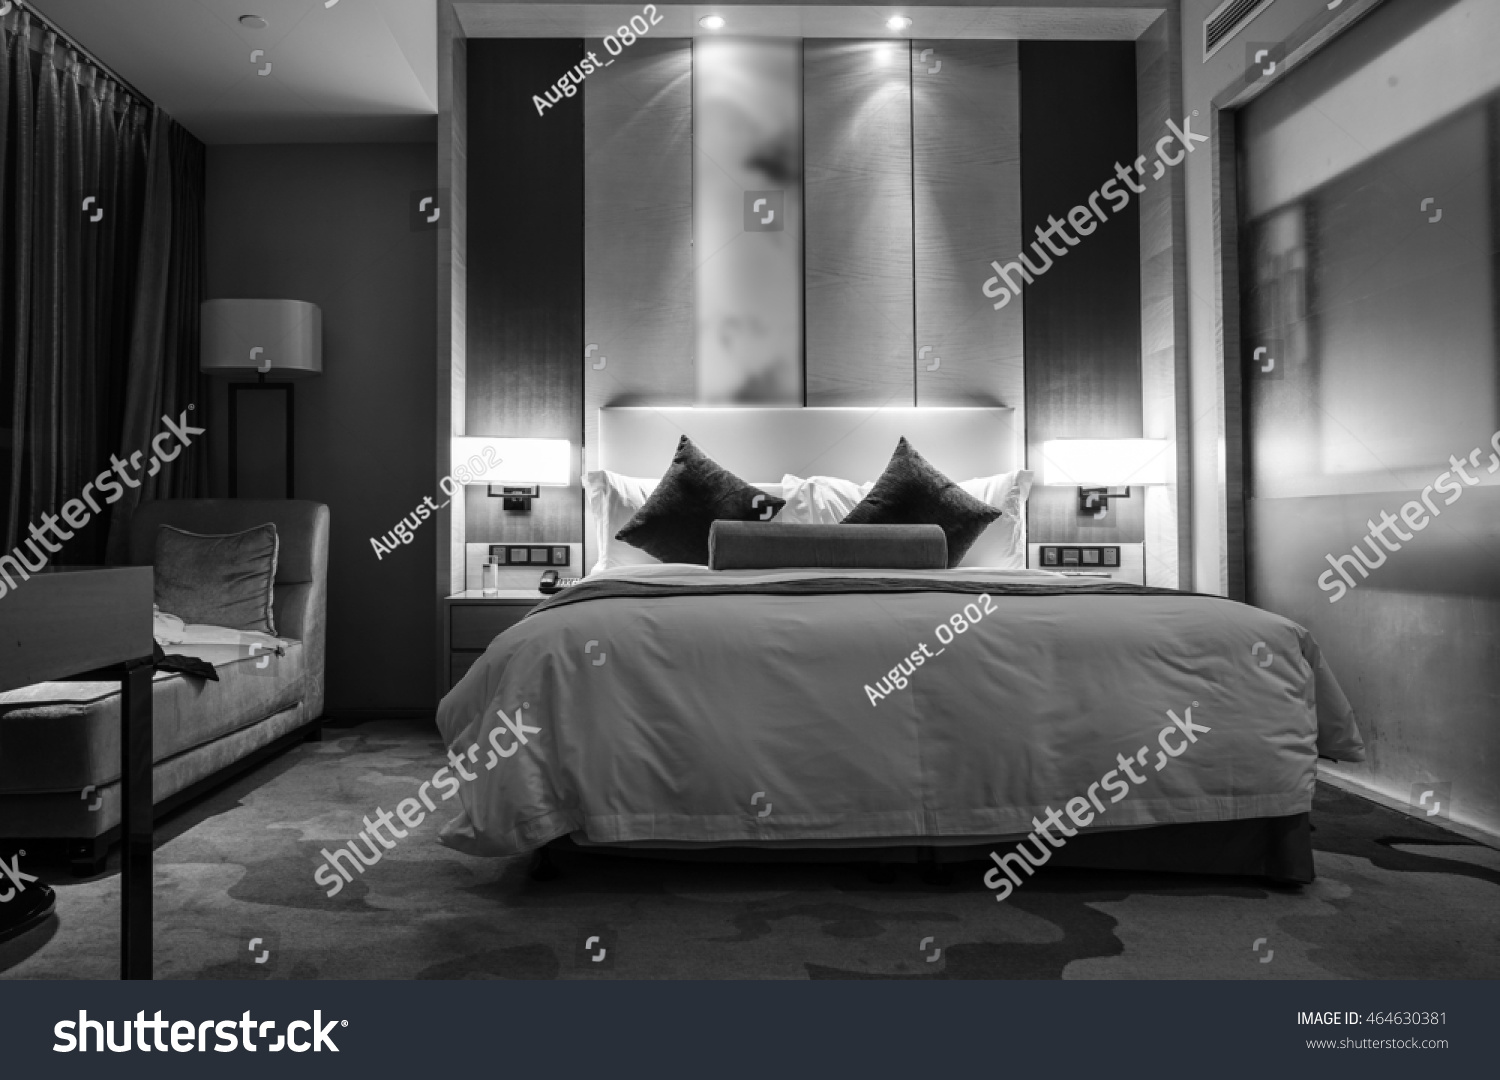 Black and white style - Hotel room or bedroom Interior. hotel concept. #464630381